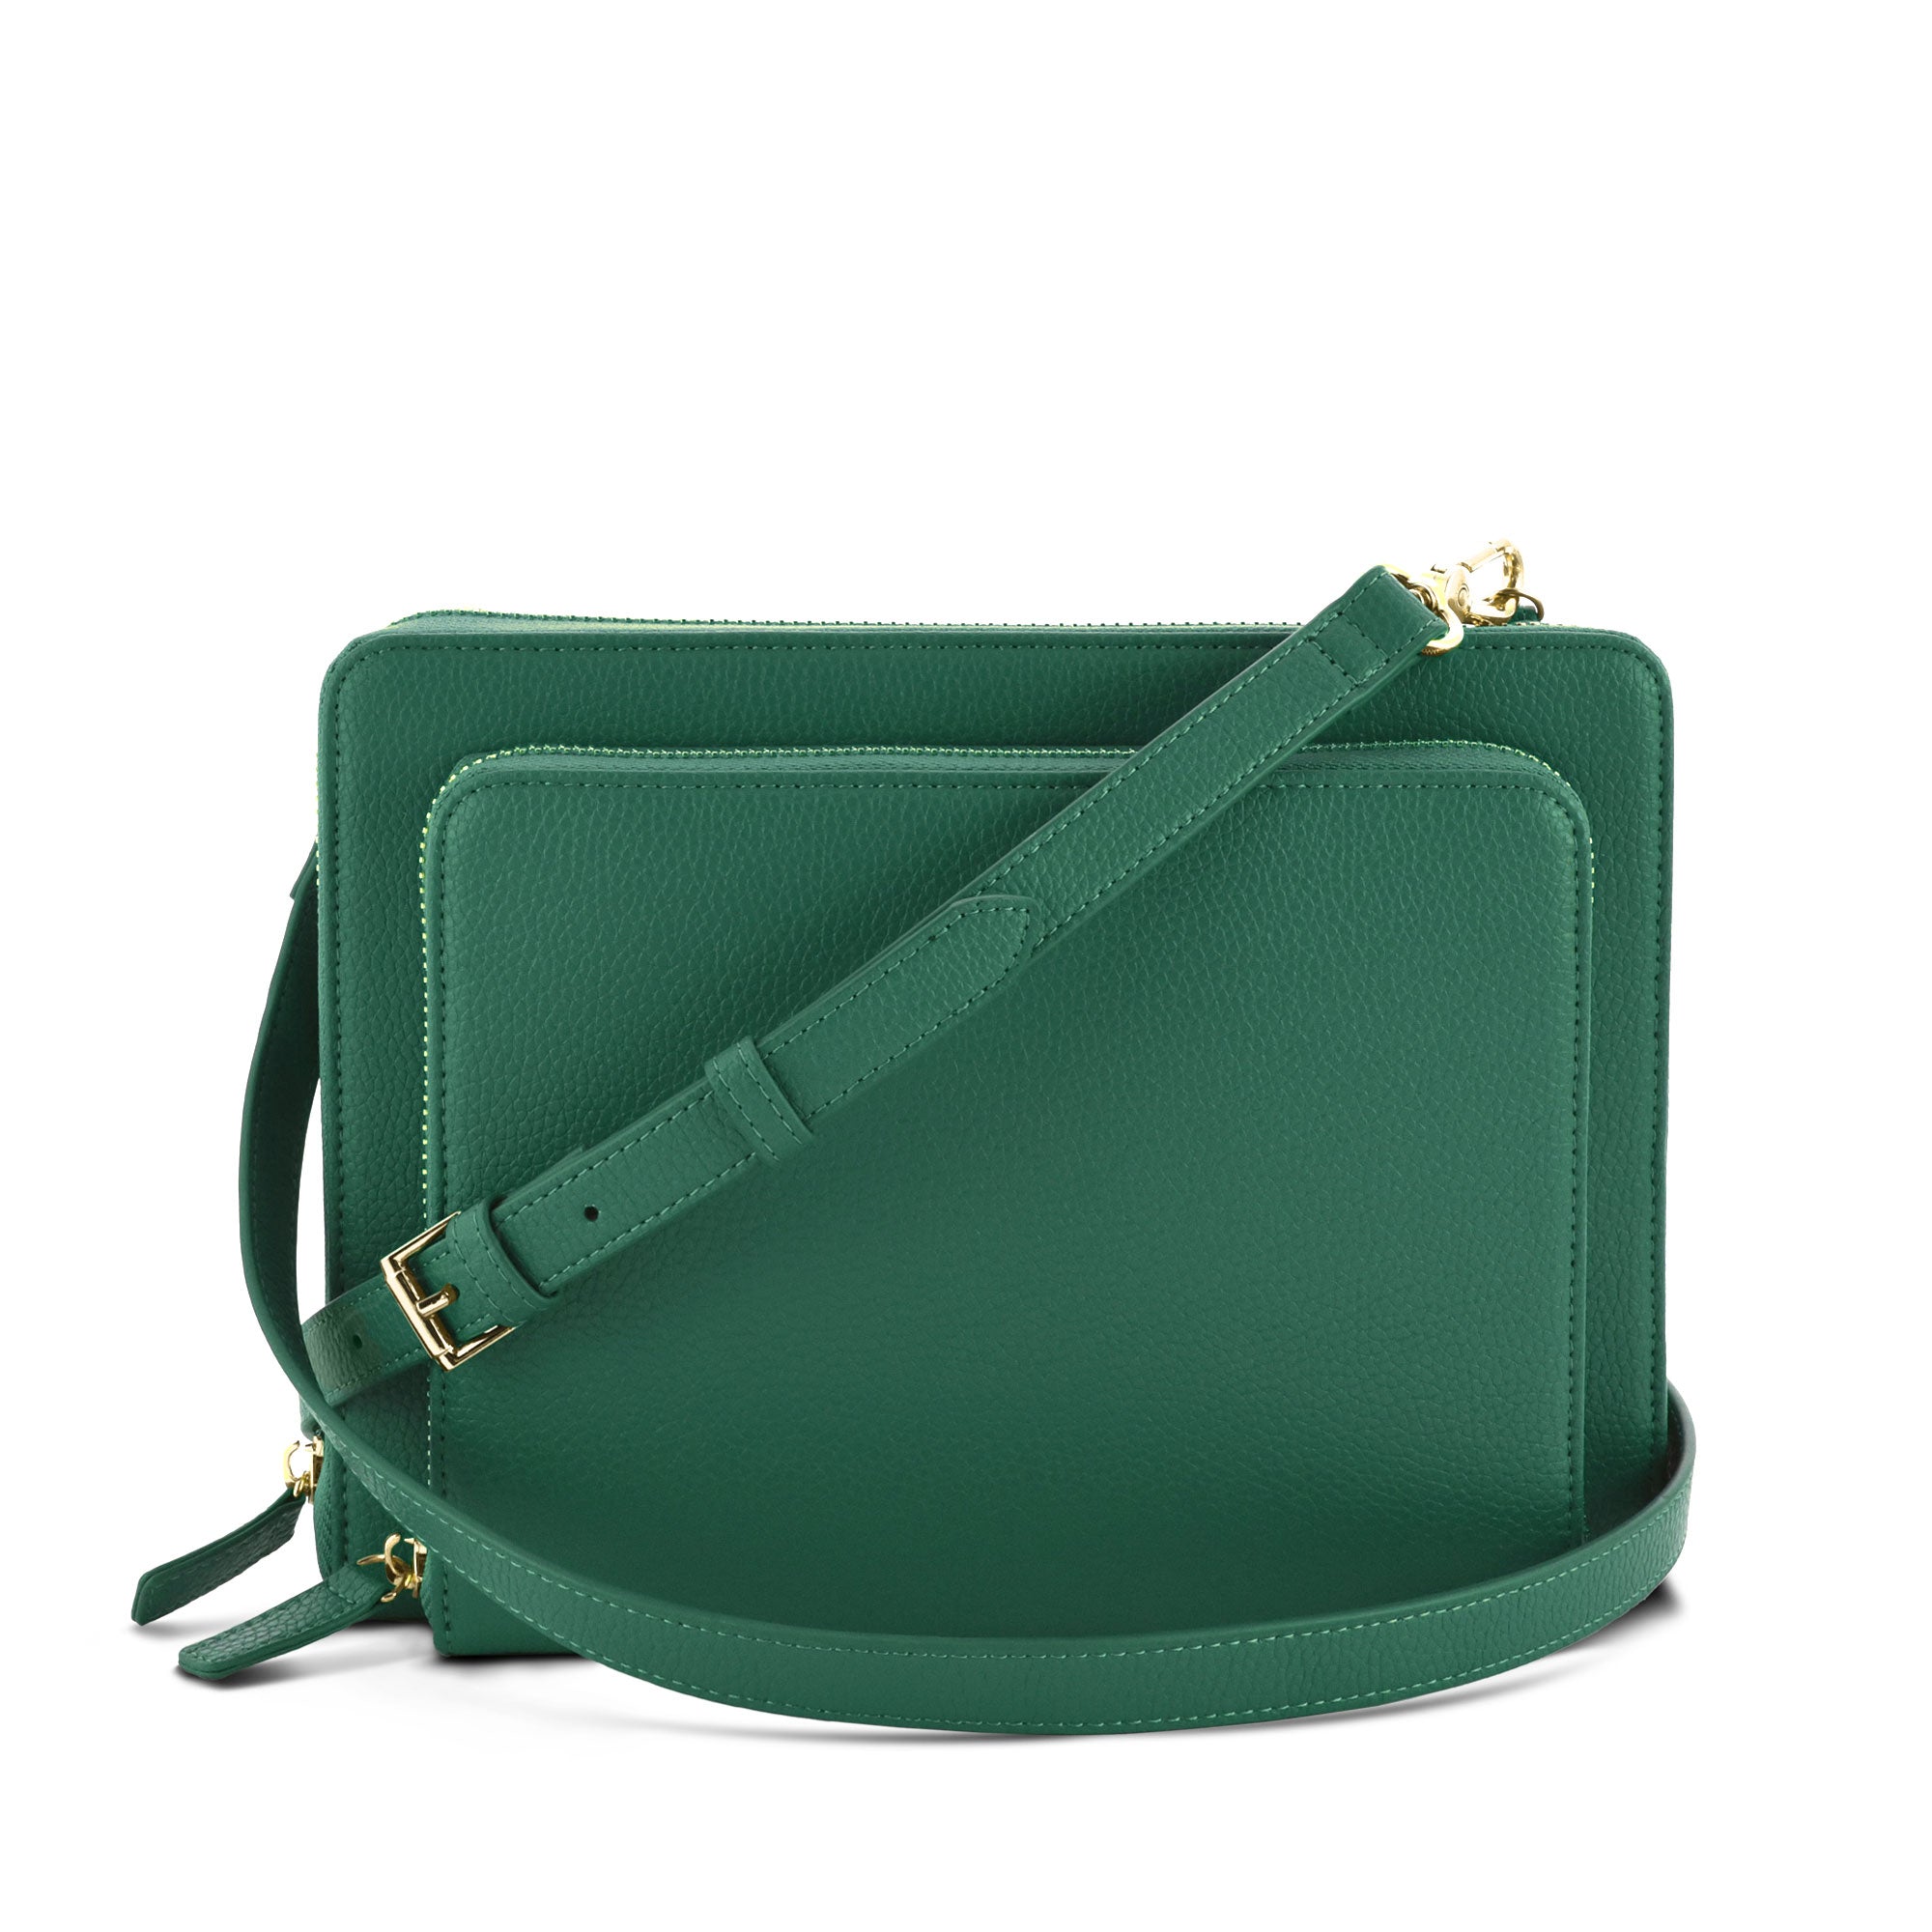 Luxury Green Party Evening Clutch For Women 2022 New Shoulder Crossbody Bags  For Lipstick Box Design Mini Purses And Handbags - Shoulder Bags -  AliExpress